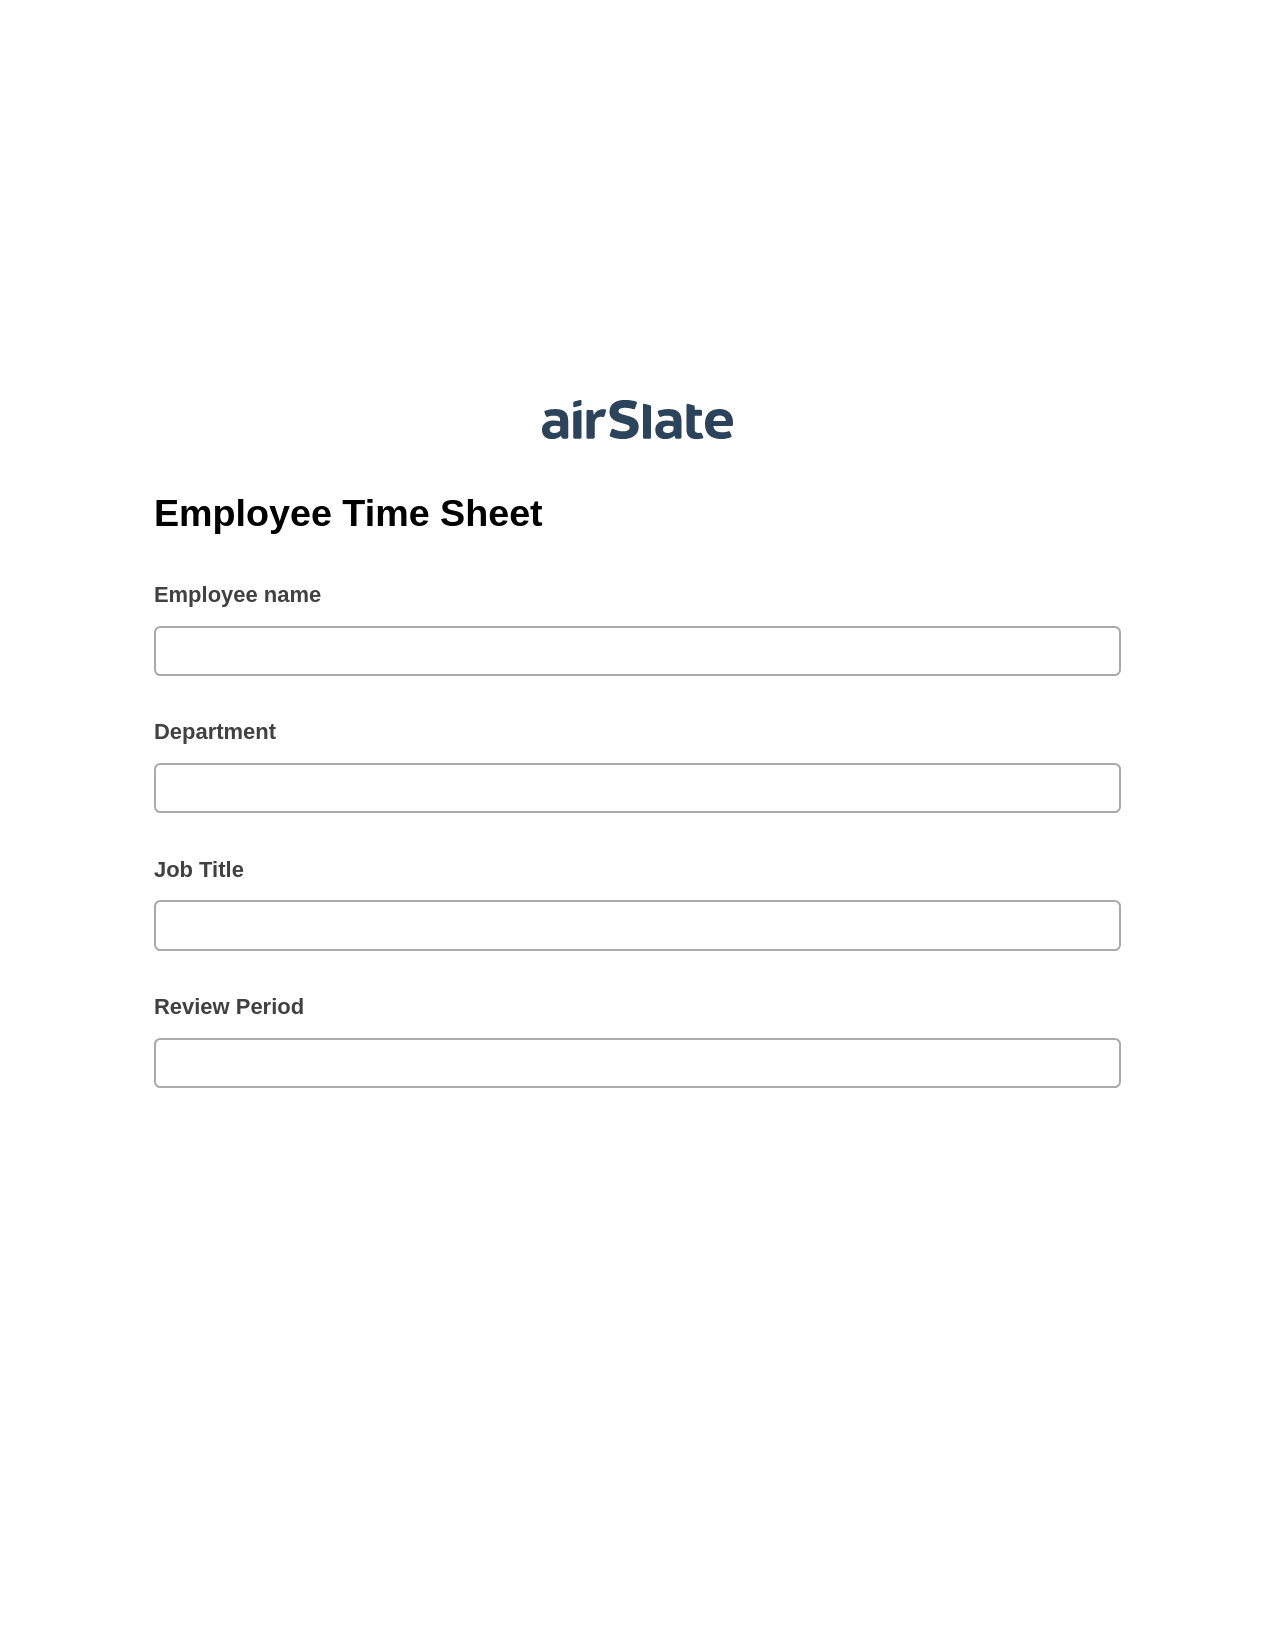 Employee Time Sheet Pre-fill Dropdowns from CSV file Bot, Hide Signatures Bot, Export to Excel 365 Bot